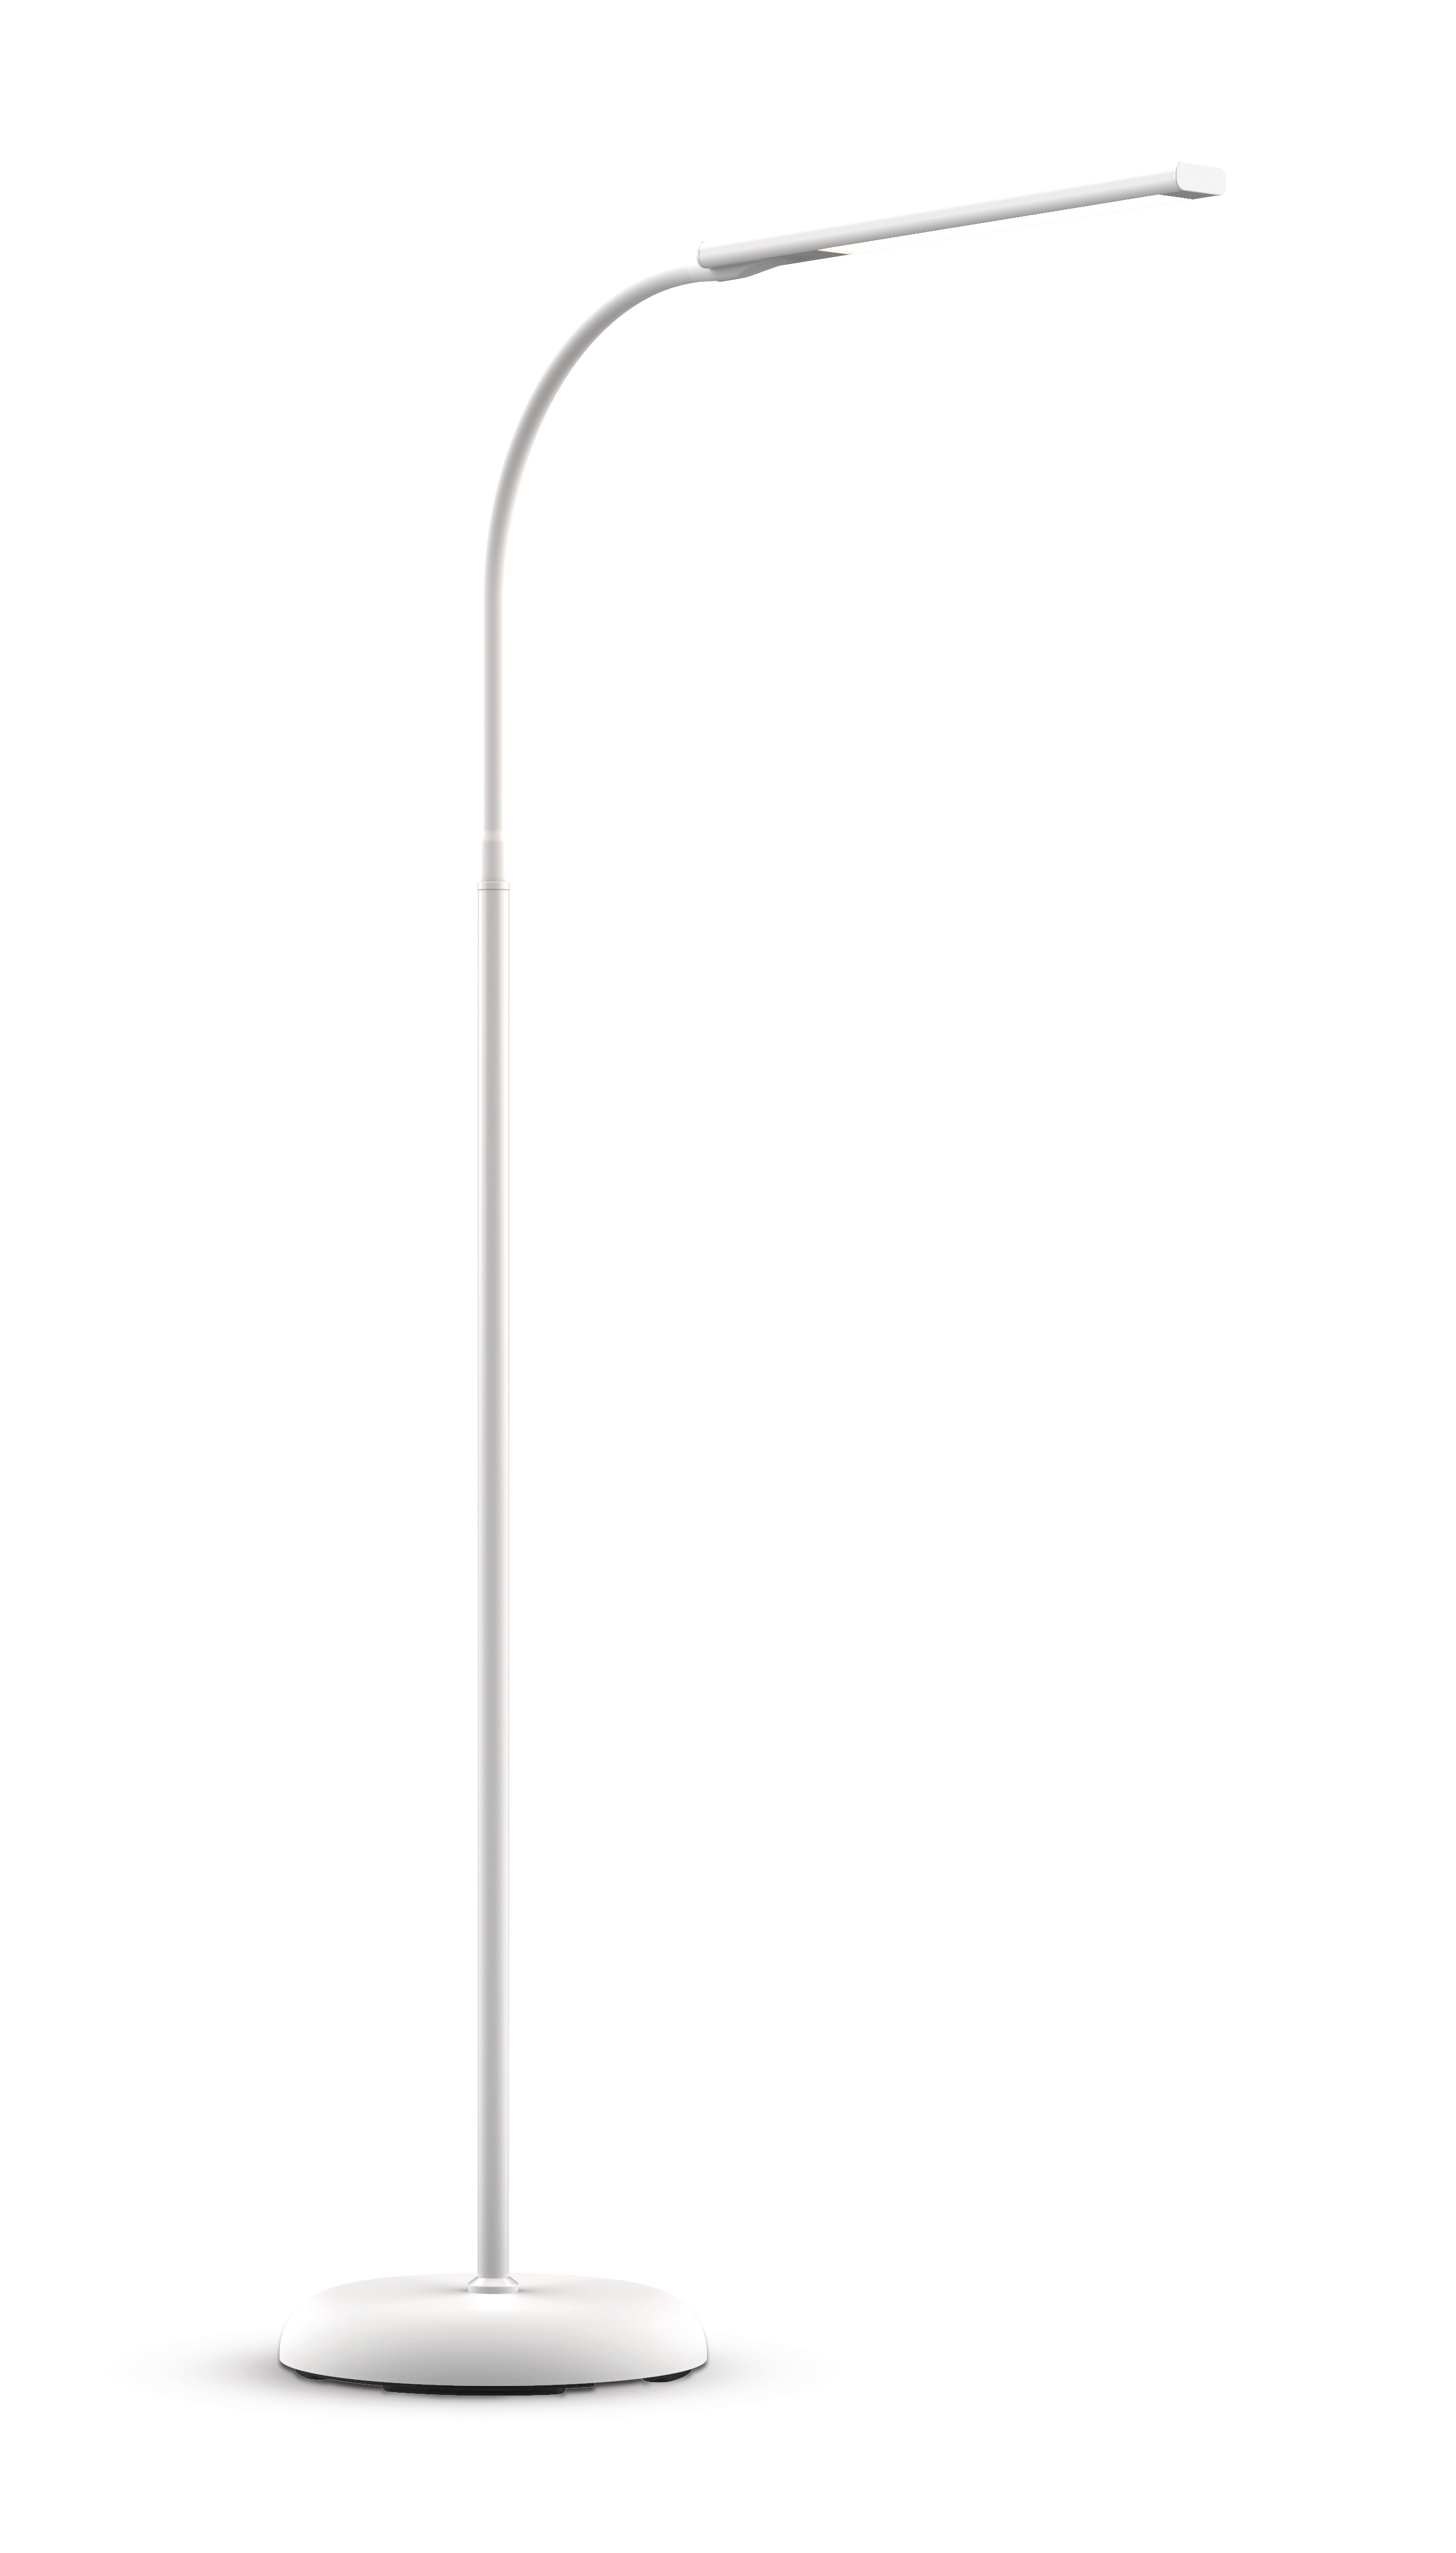 MAUL Lampadaire LED MAULpirro 8234802 blanc, dimmable blanc, dimmable